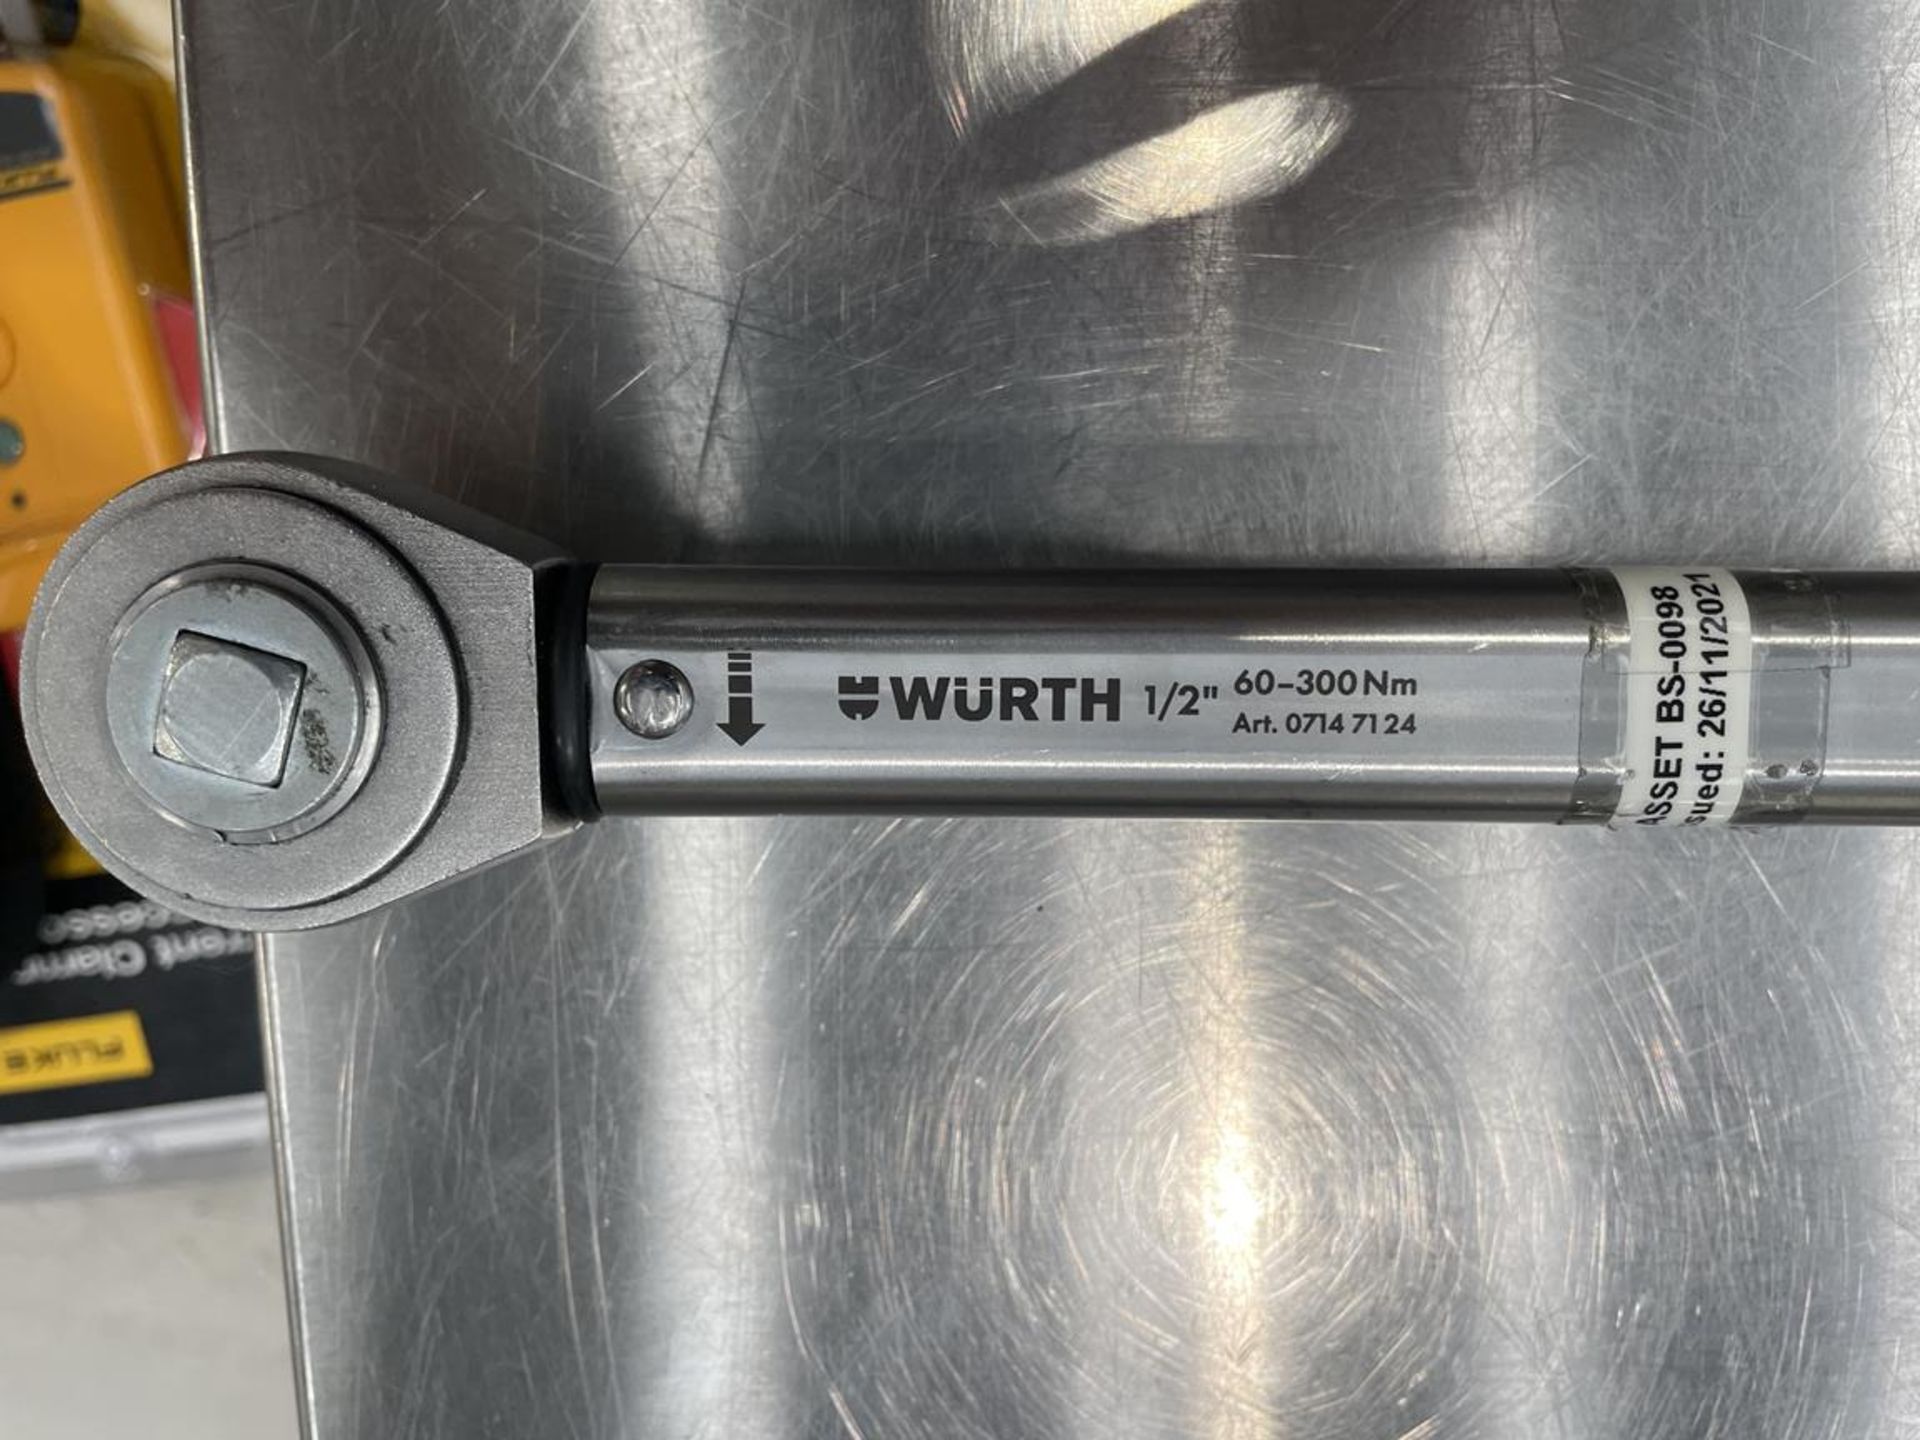 Wurth 1/2" torque wrench, 60 - 300Nm - Image 2 of 4